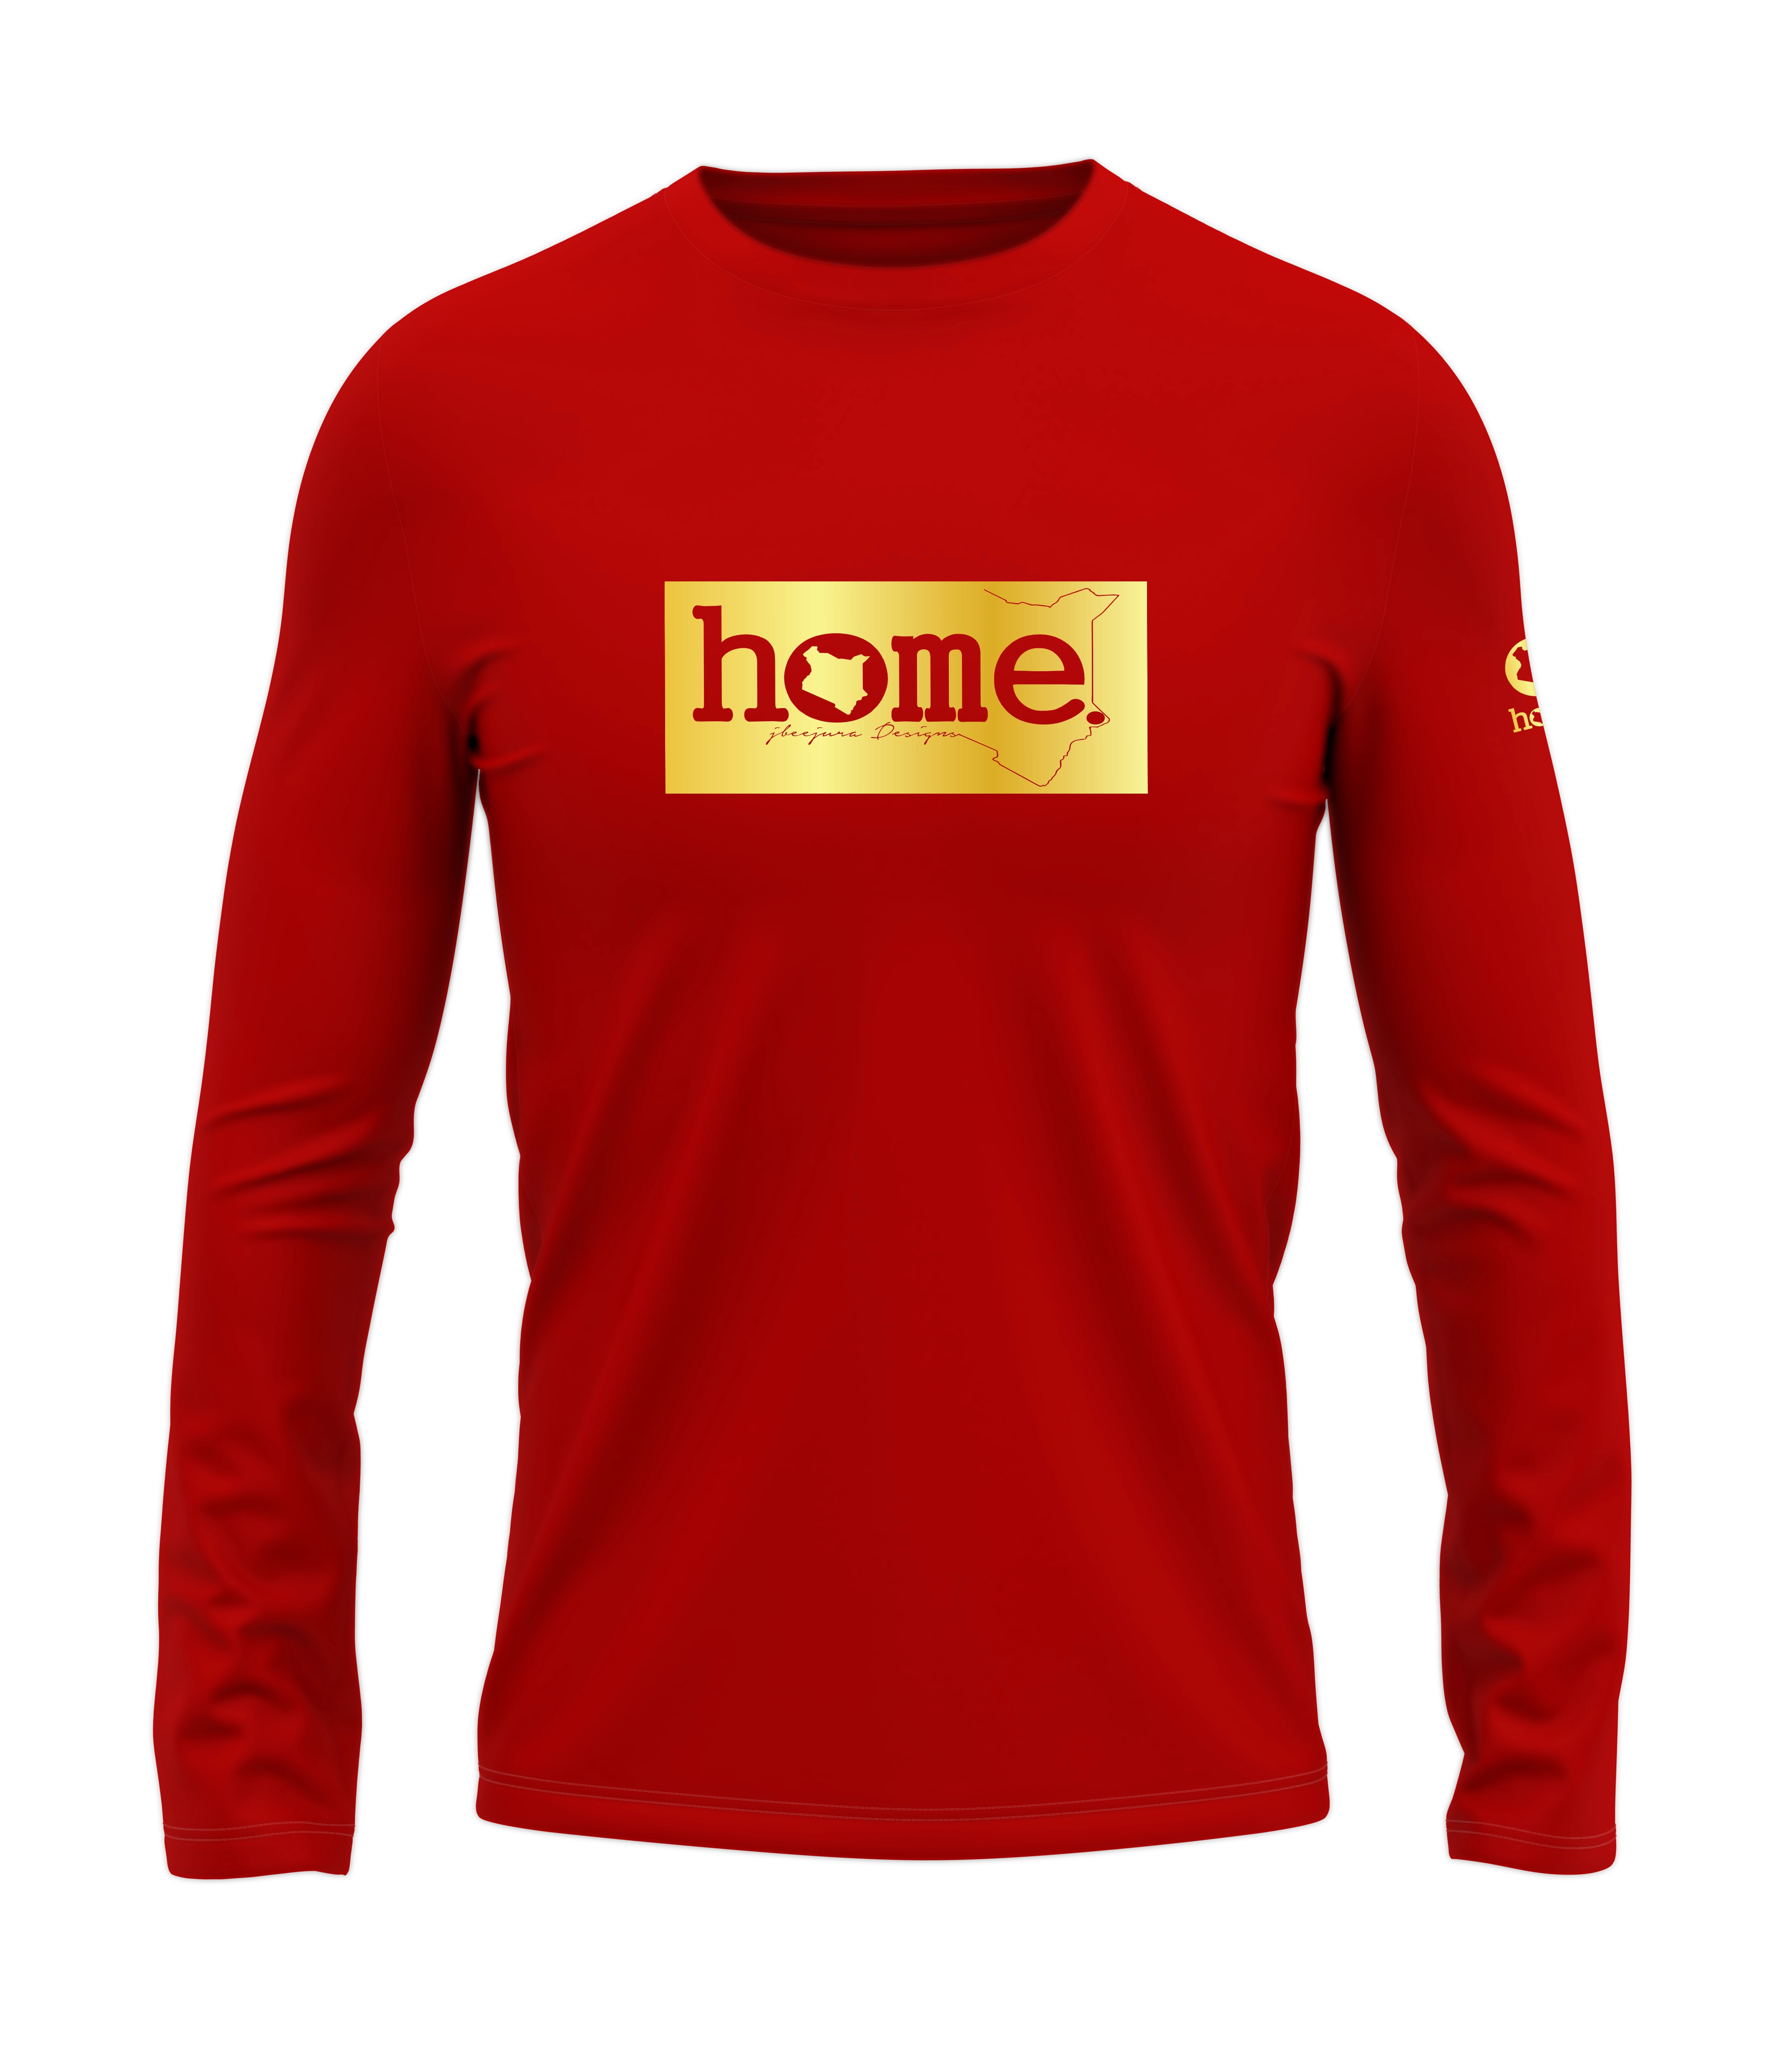 home_254 LONG-SLEEVED RED T-SHIRT WITH A GOLD CLASSIC PRINT – COTTON PLUS FABRIC